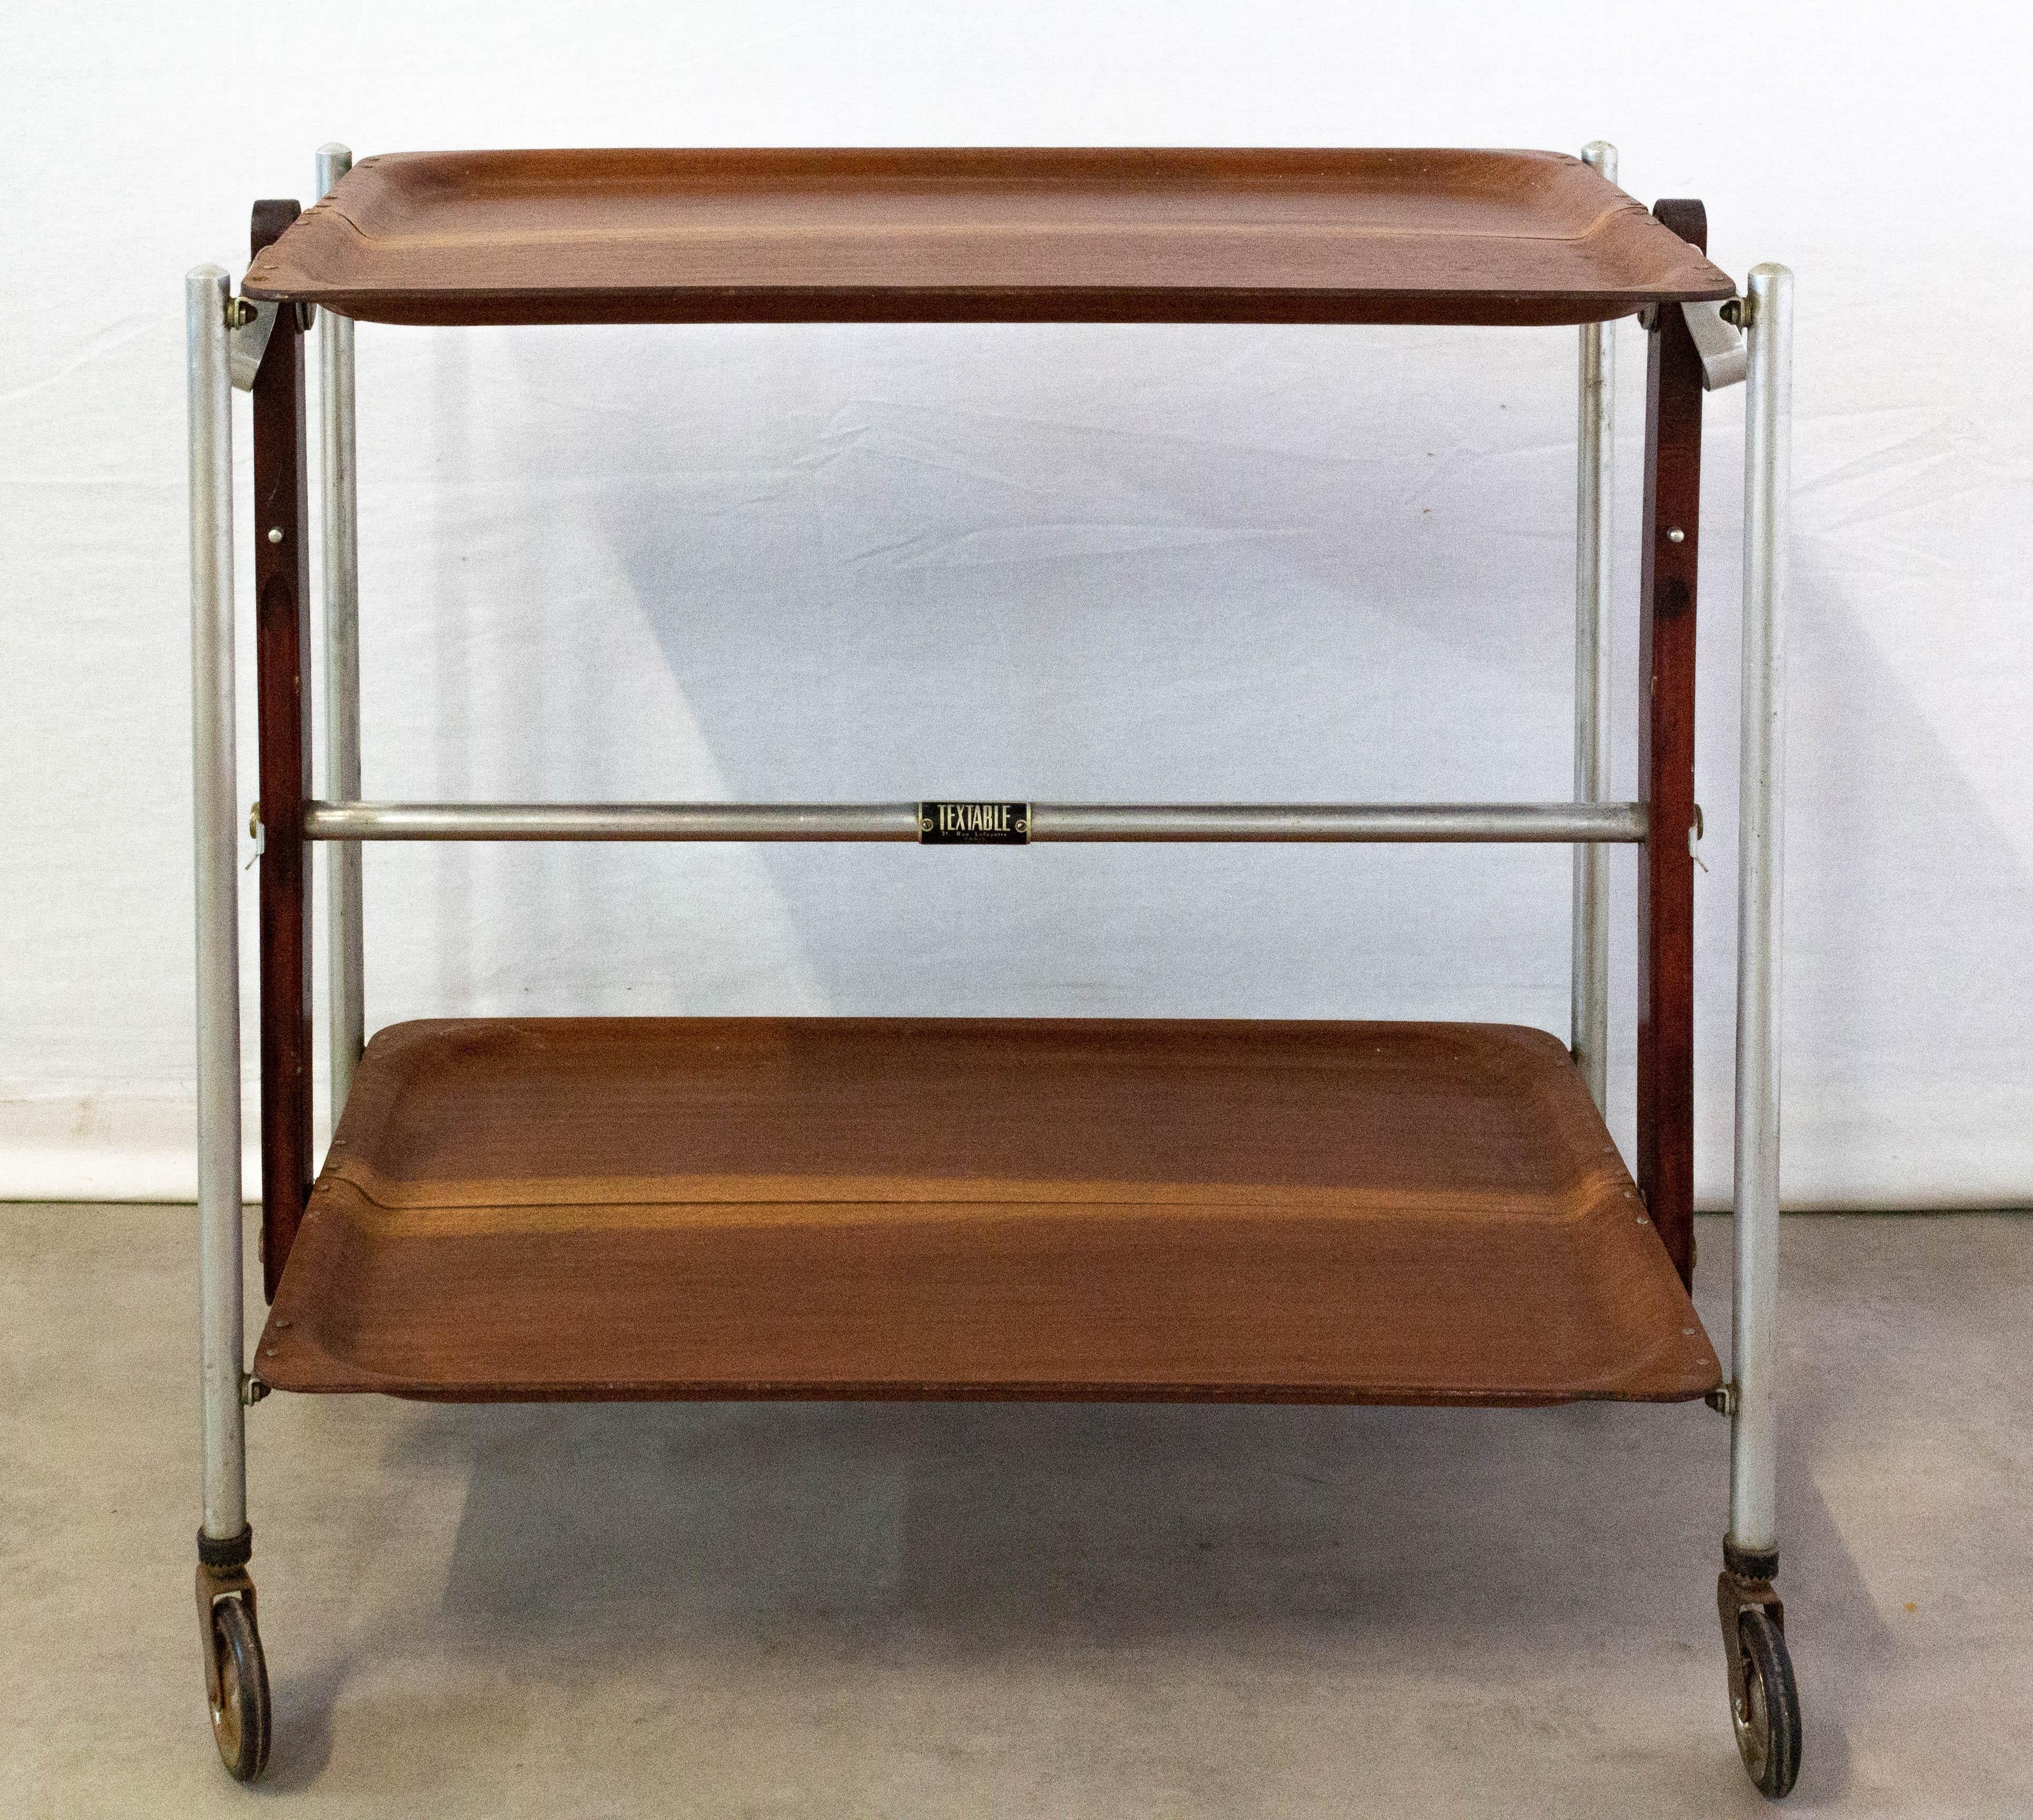 Mahogany serving trolley folding bar cart drinks midcentury, circa 1950s.
This serving trolley can also be used as a side table.
In good working order.
Very versatile and practical.
Very good vintage condition.
Measures: H 62 cm x W 41 cm x D